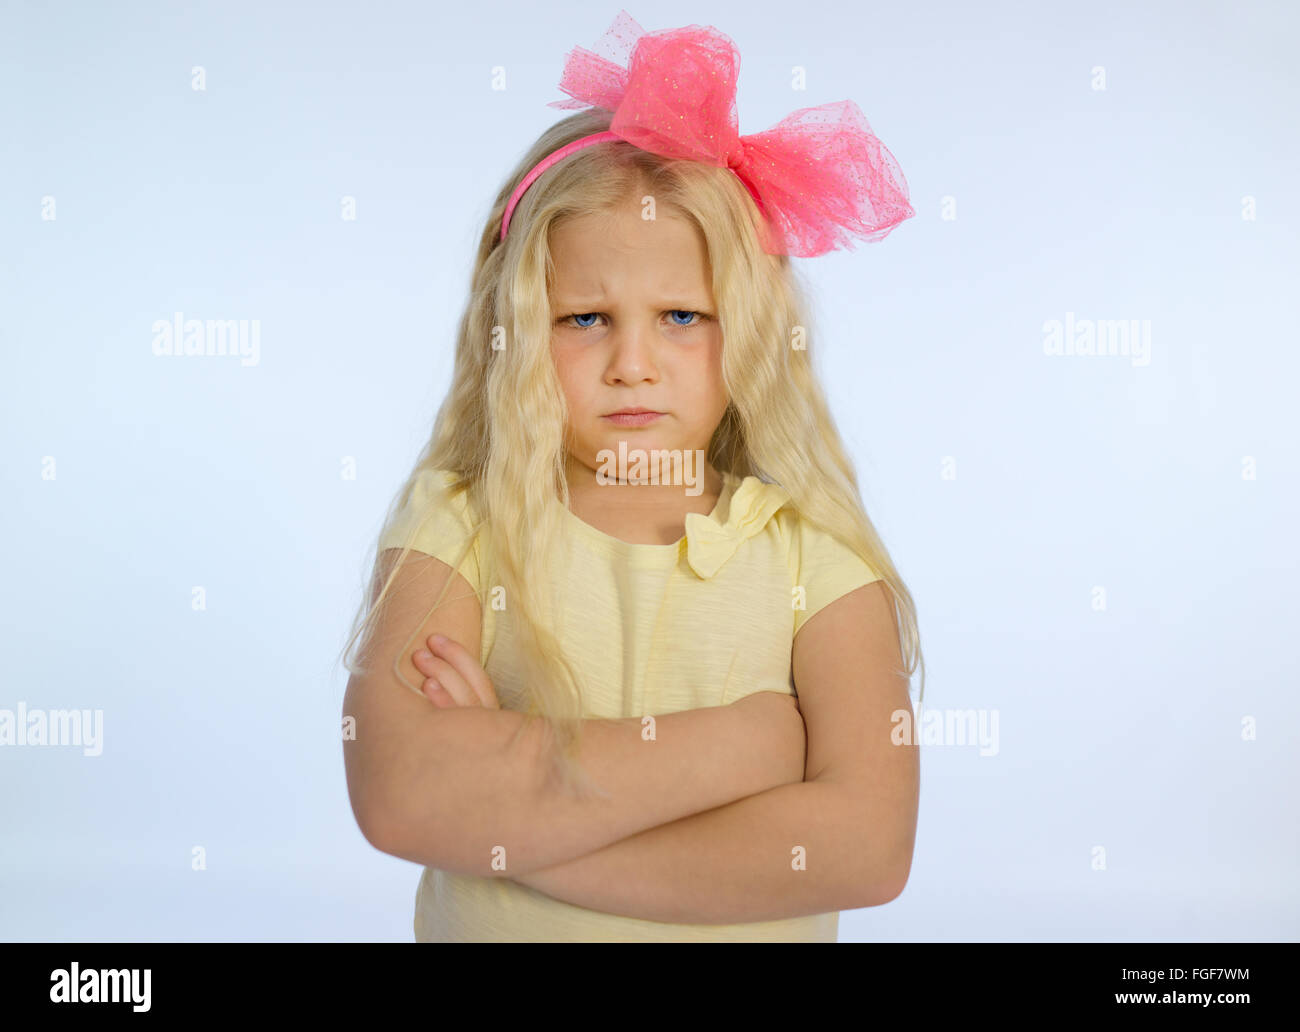 Young girl with long blonde hair and folded arms, frowning with a sad and grumpy expression Stock Photo